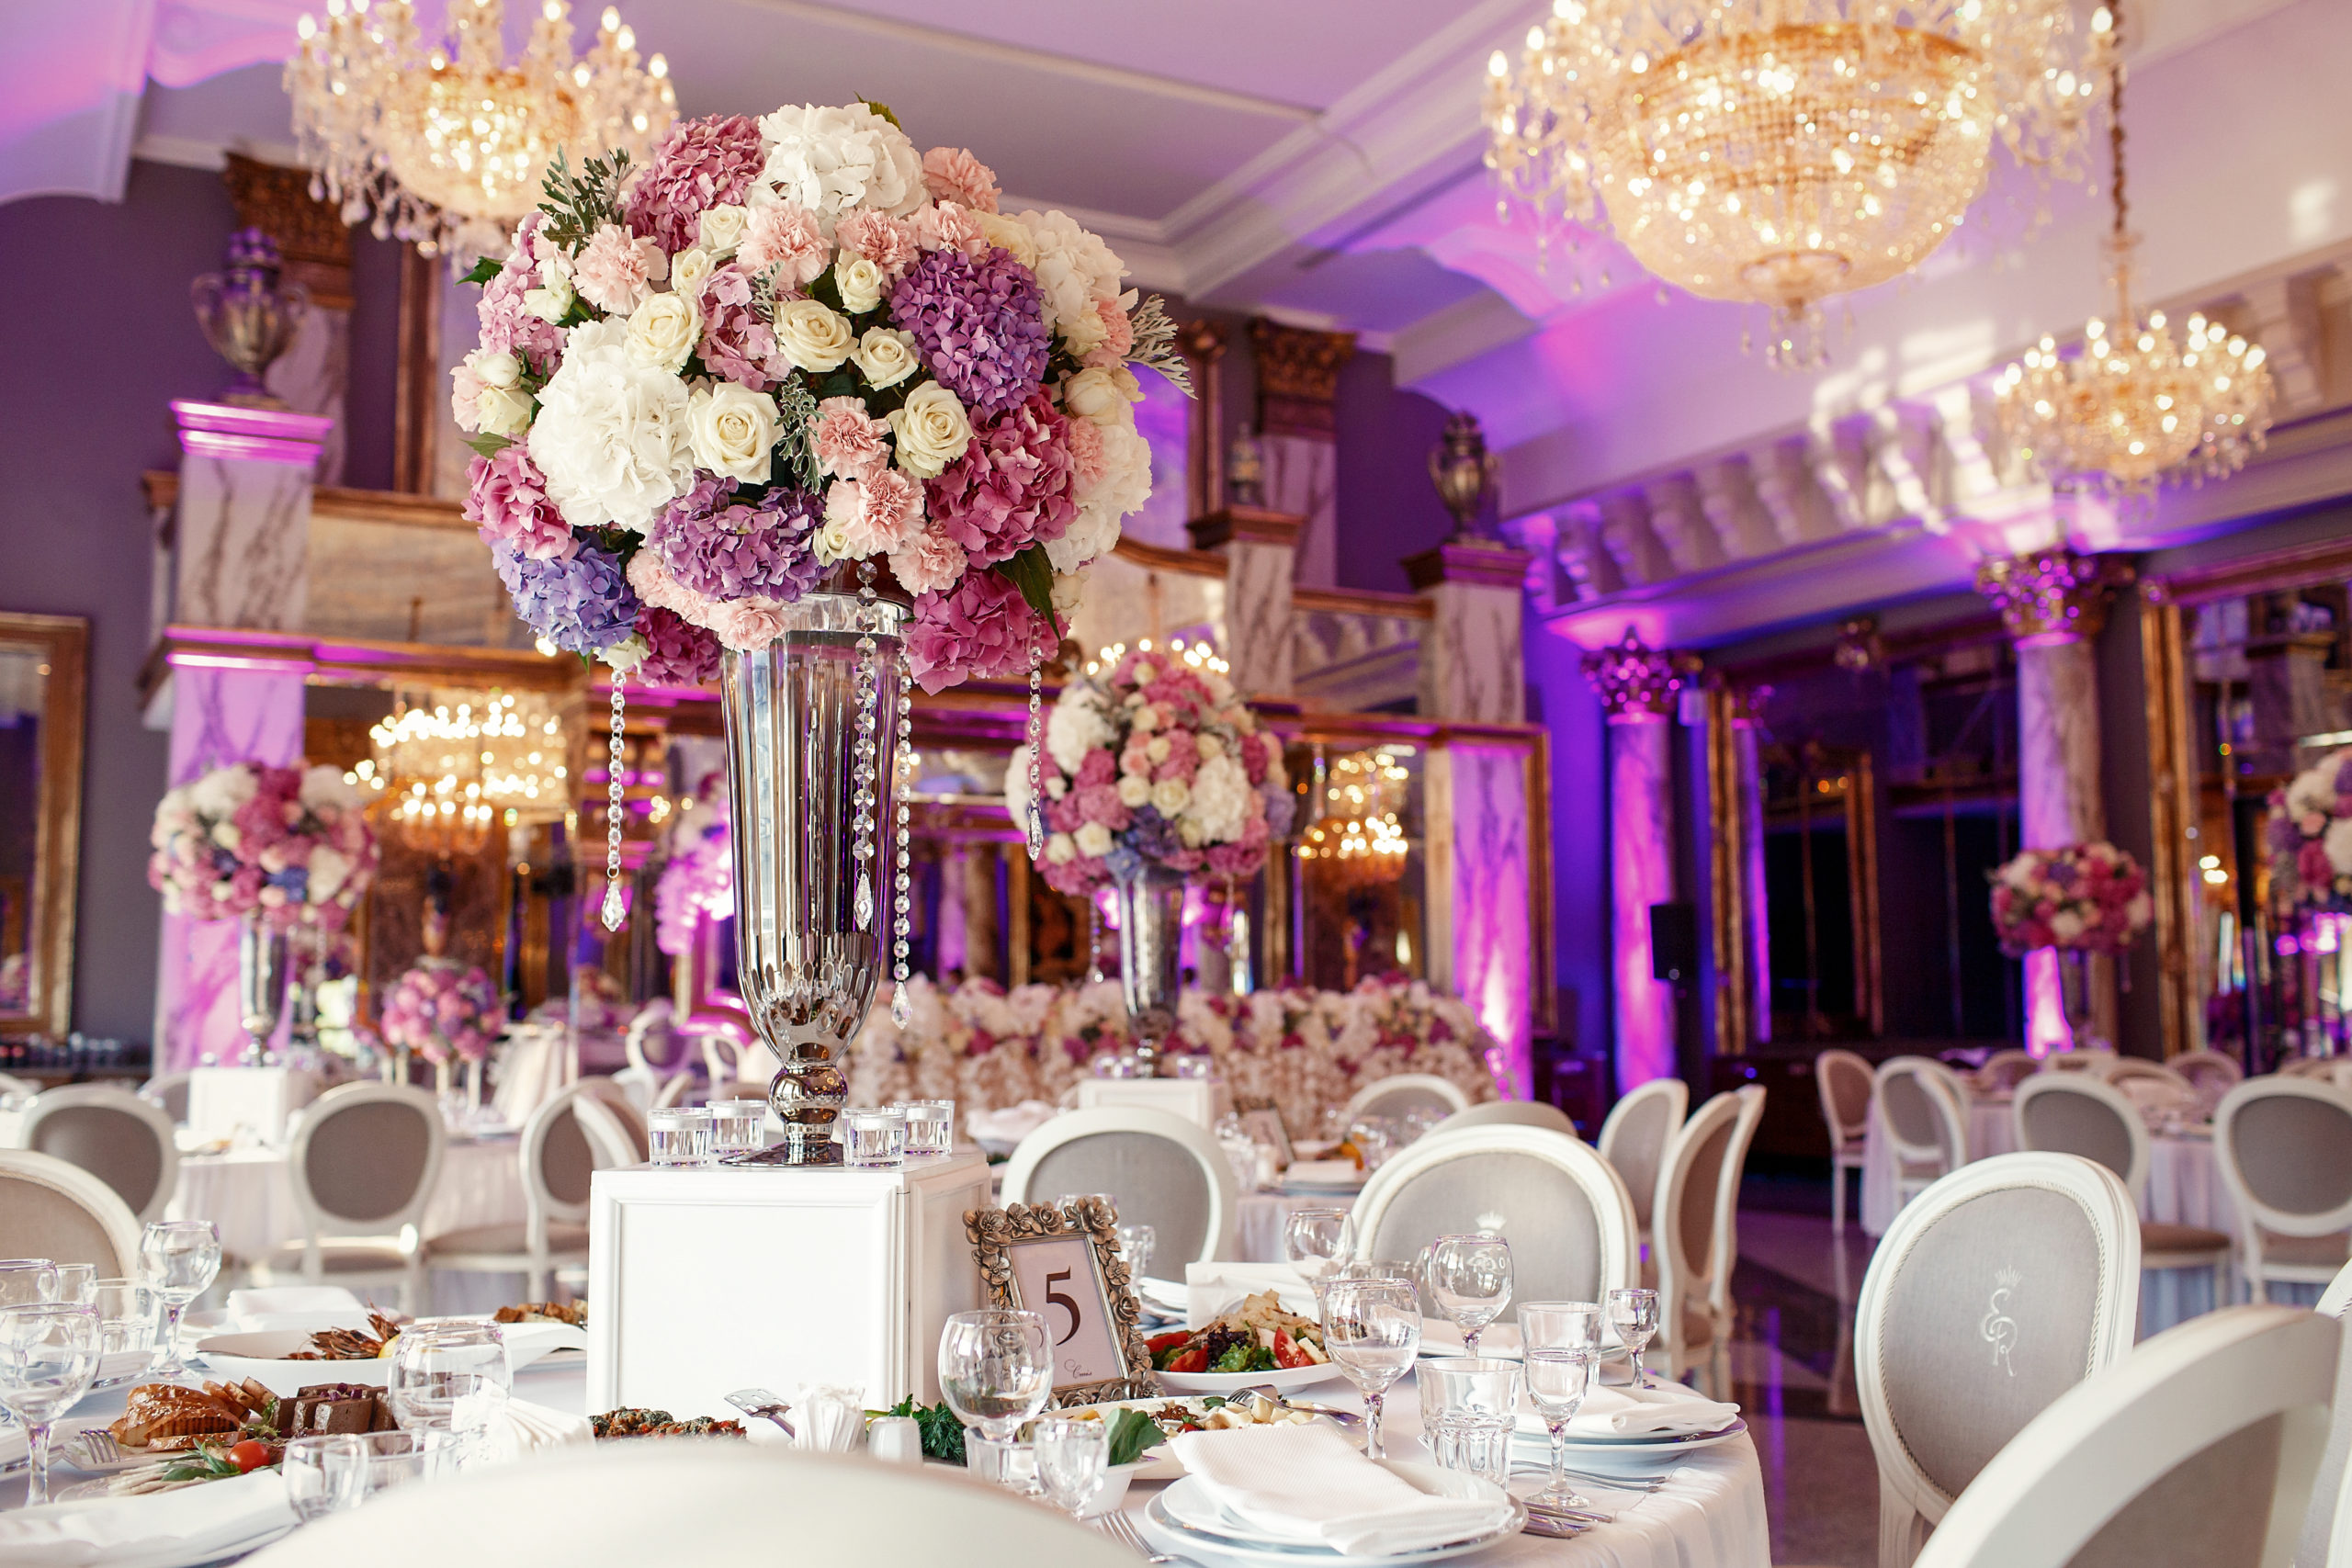 Table number 5 decorated with pink and violet hydrangeas and served with sparkling glassware